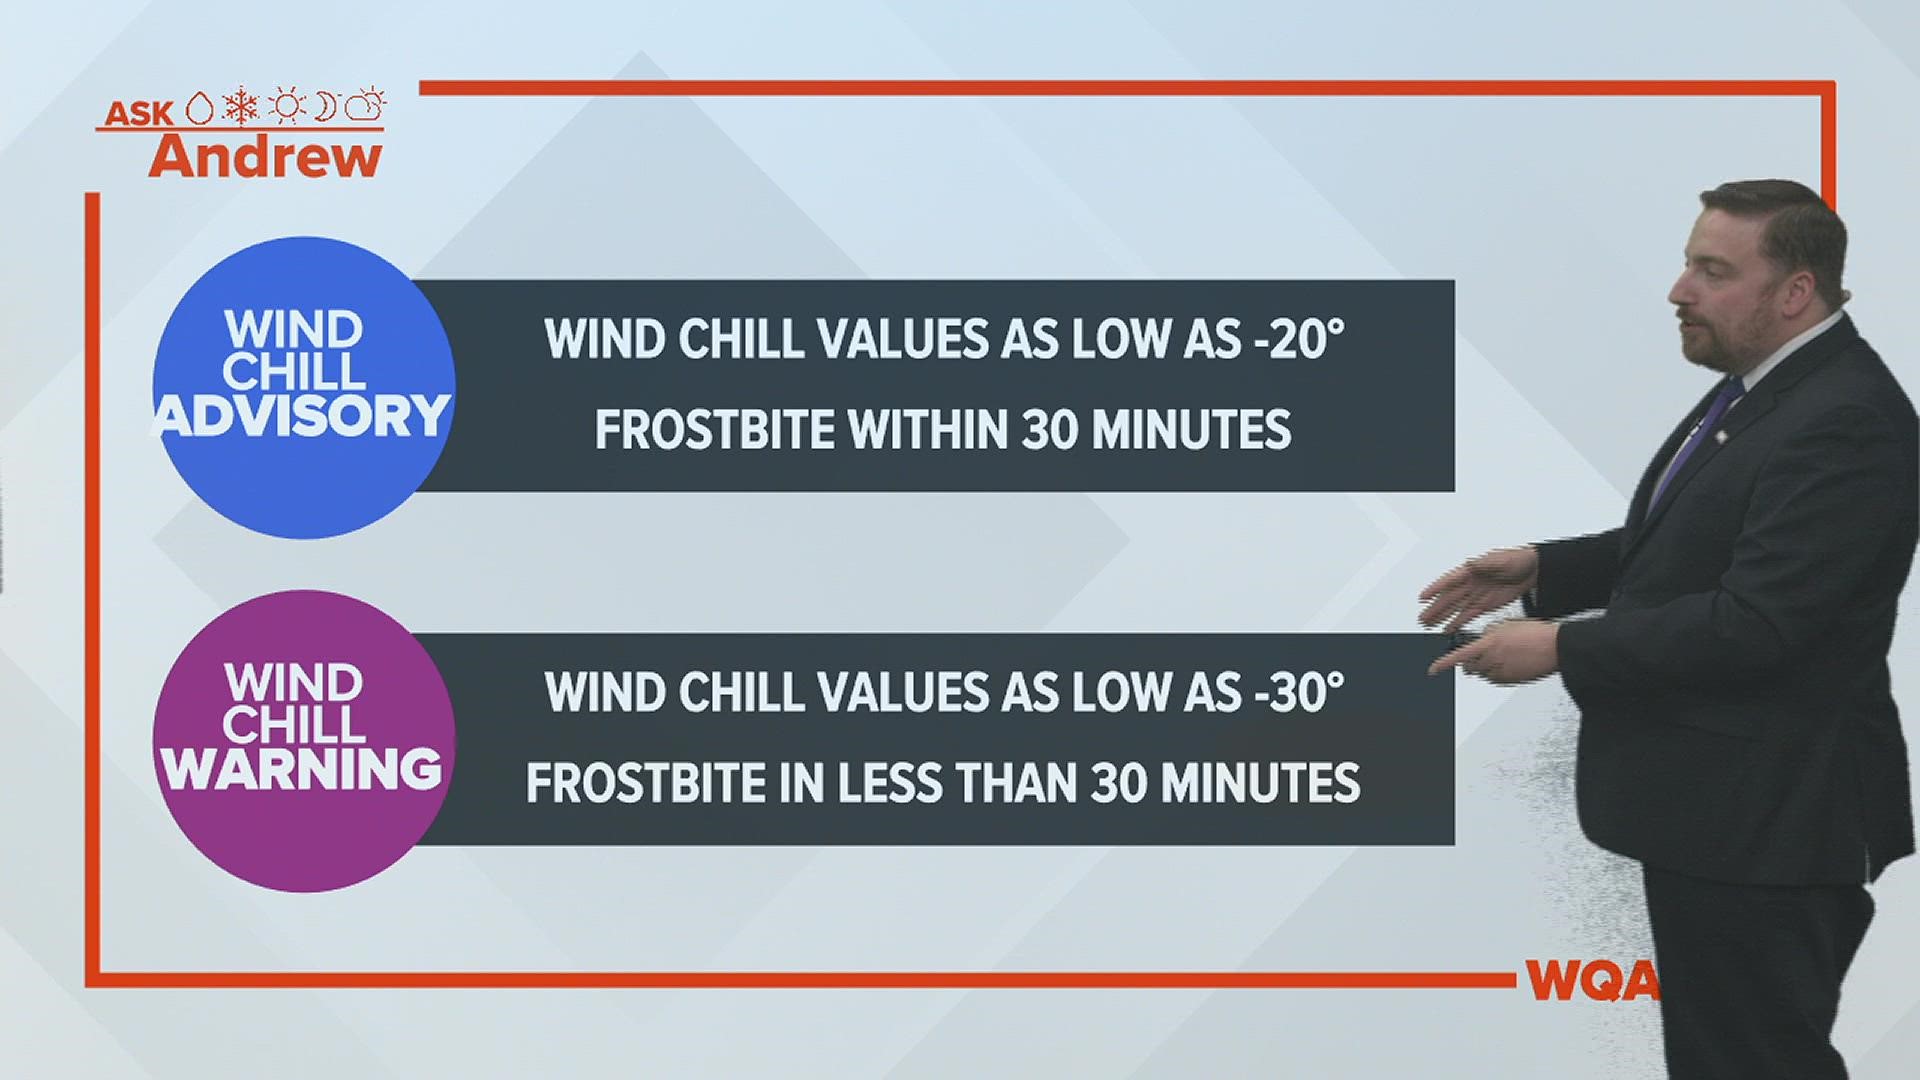 Who is in charge of determining which areas are under a wind chill advisory or warning?